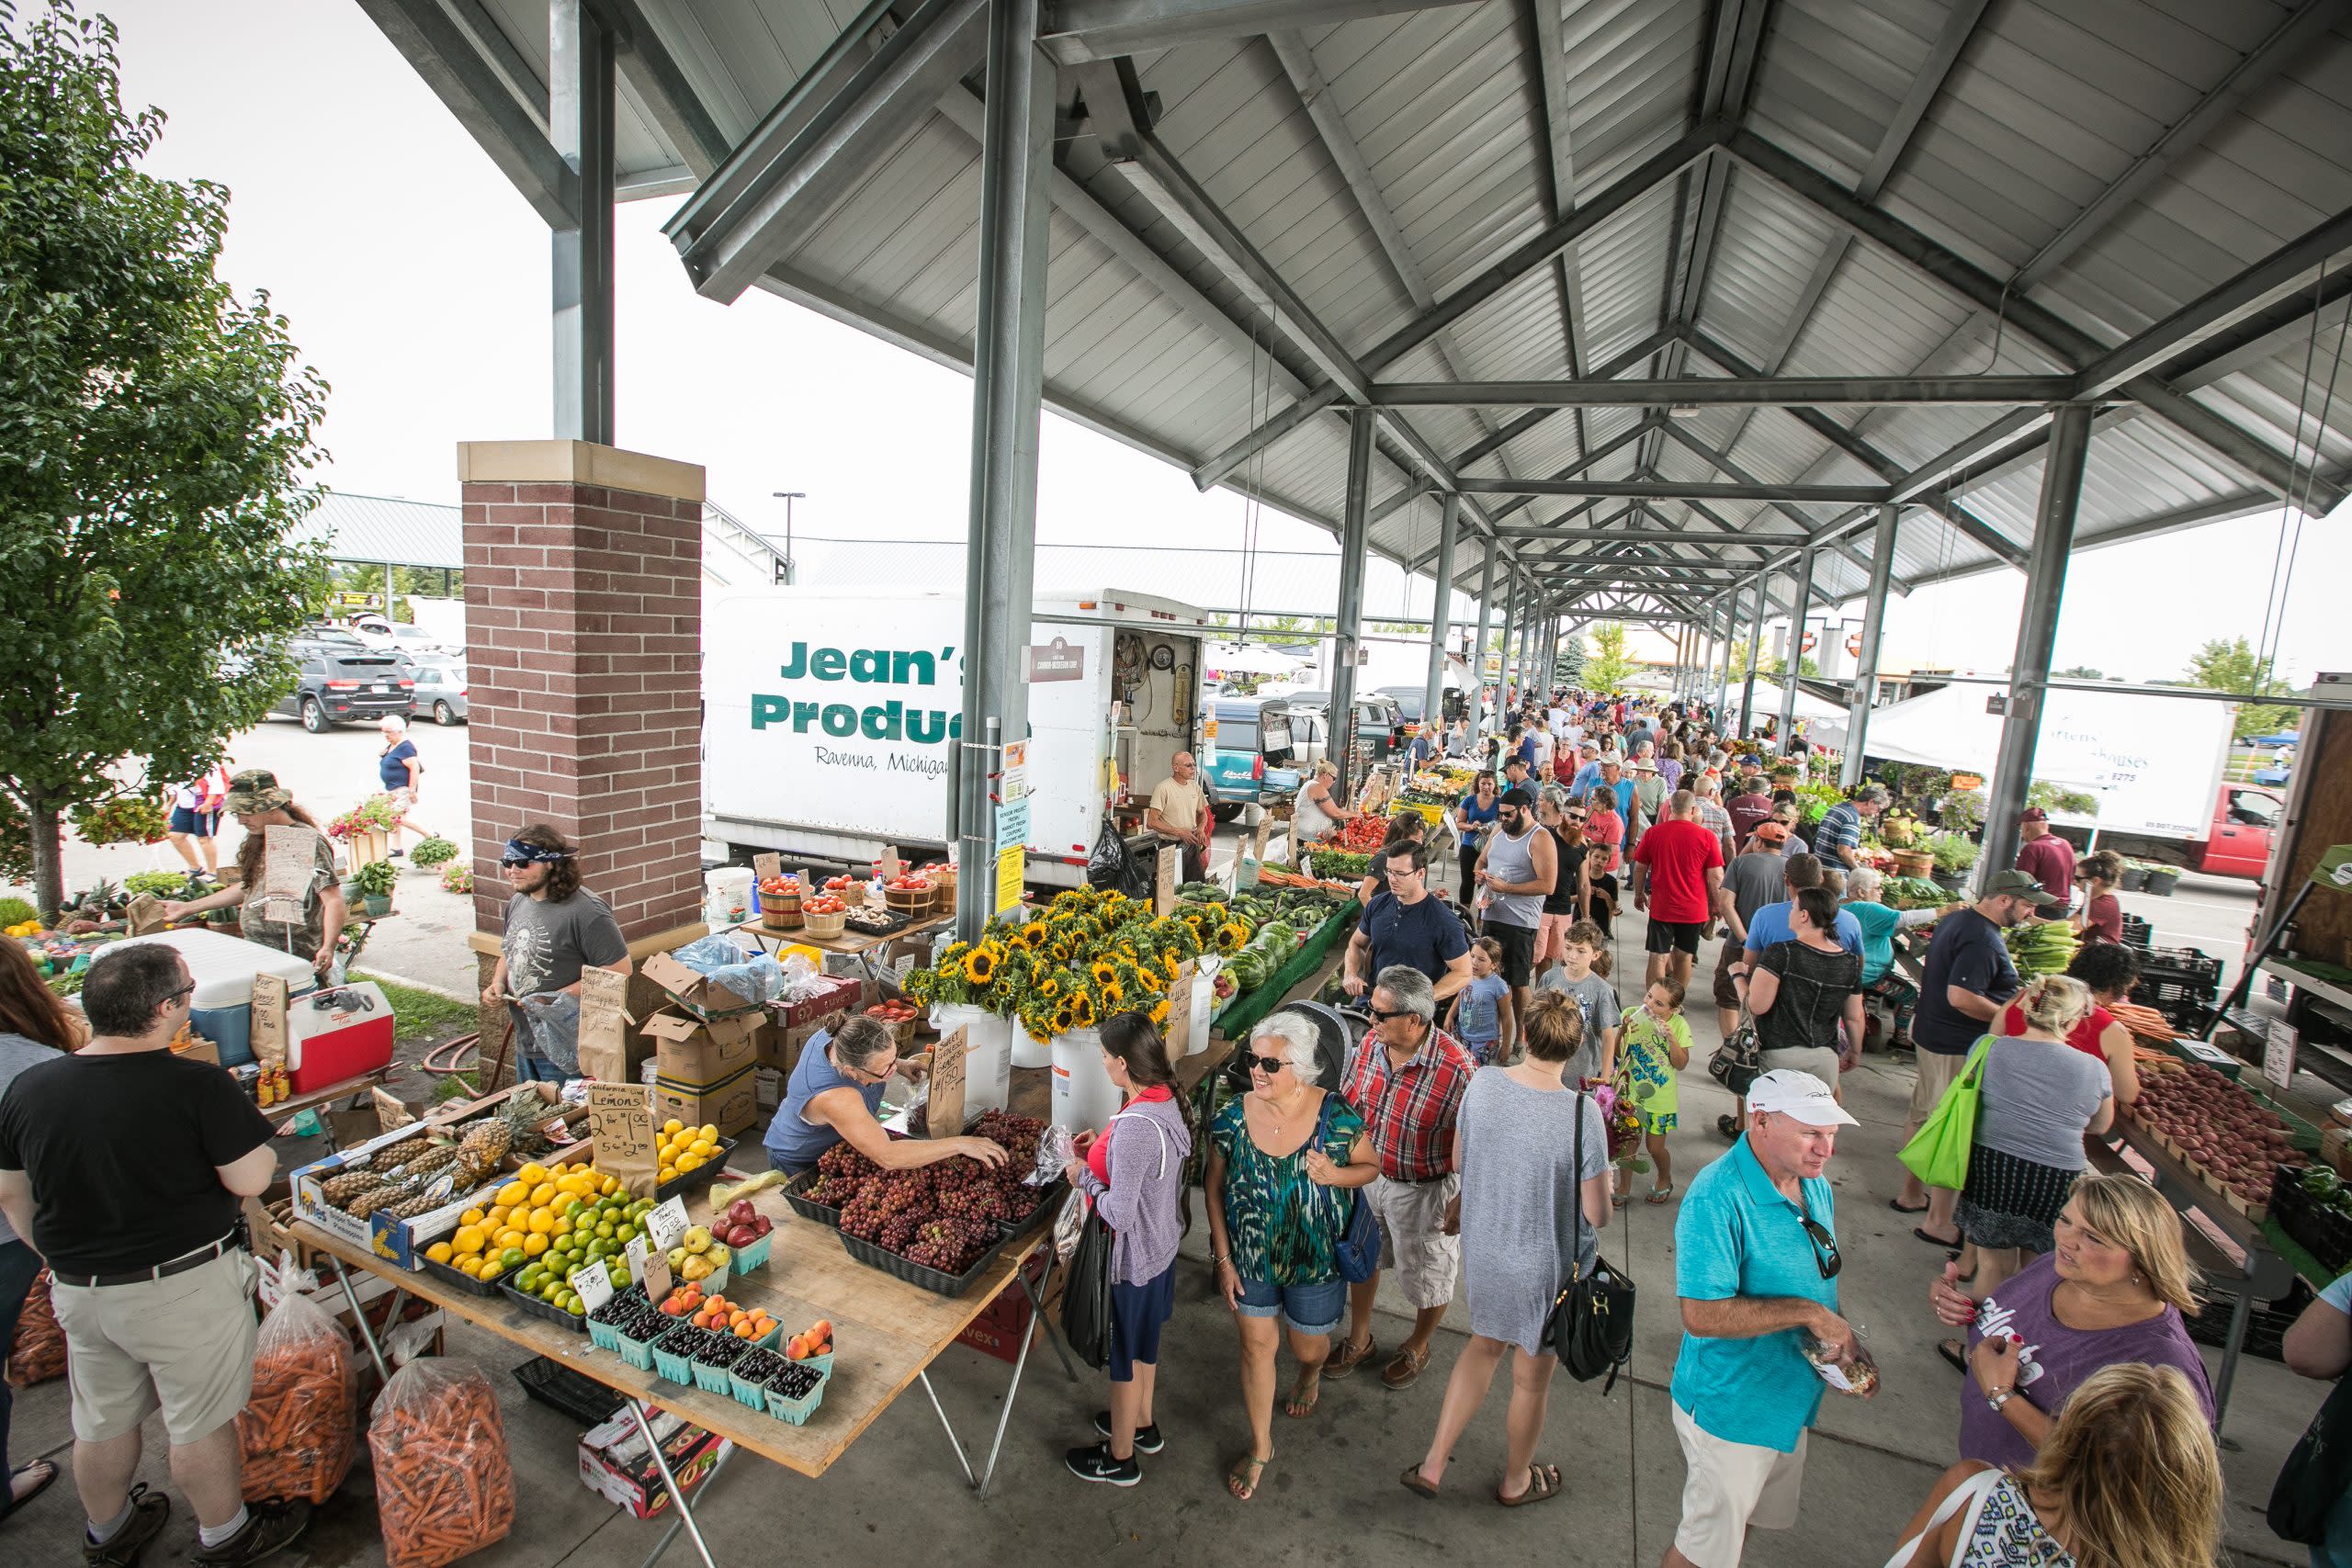 outdoor farmers market shows many shoppers on sidewalk with tables of fresh produce. a vaulted white roof covers them supported by tall white columns